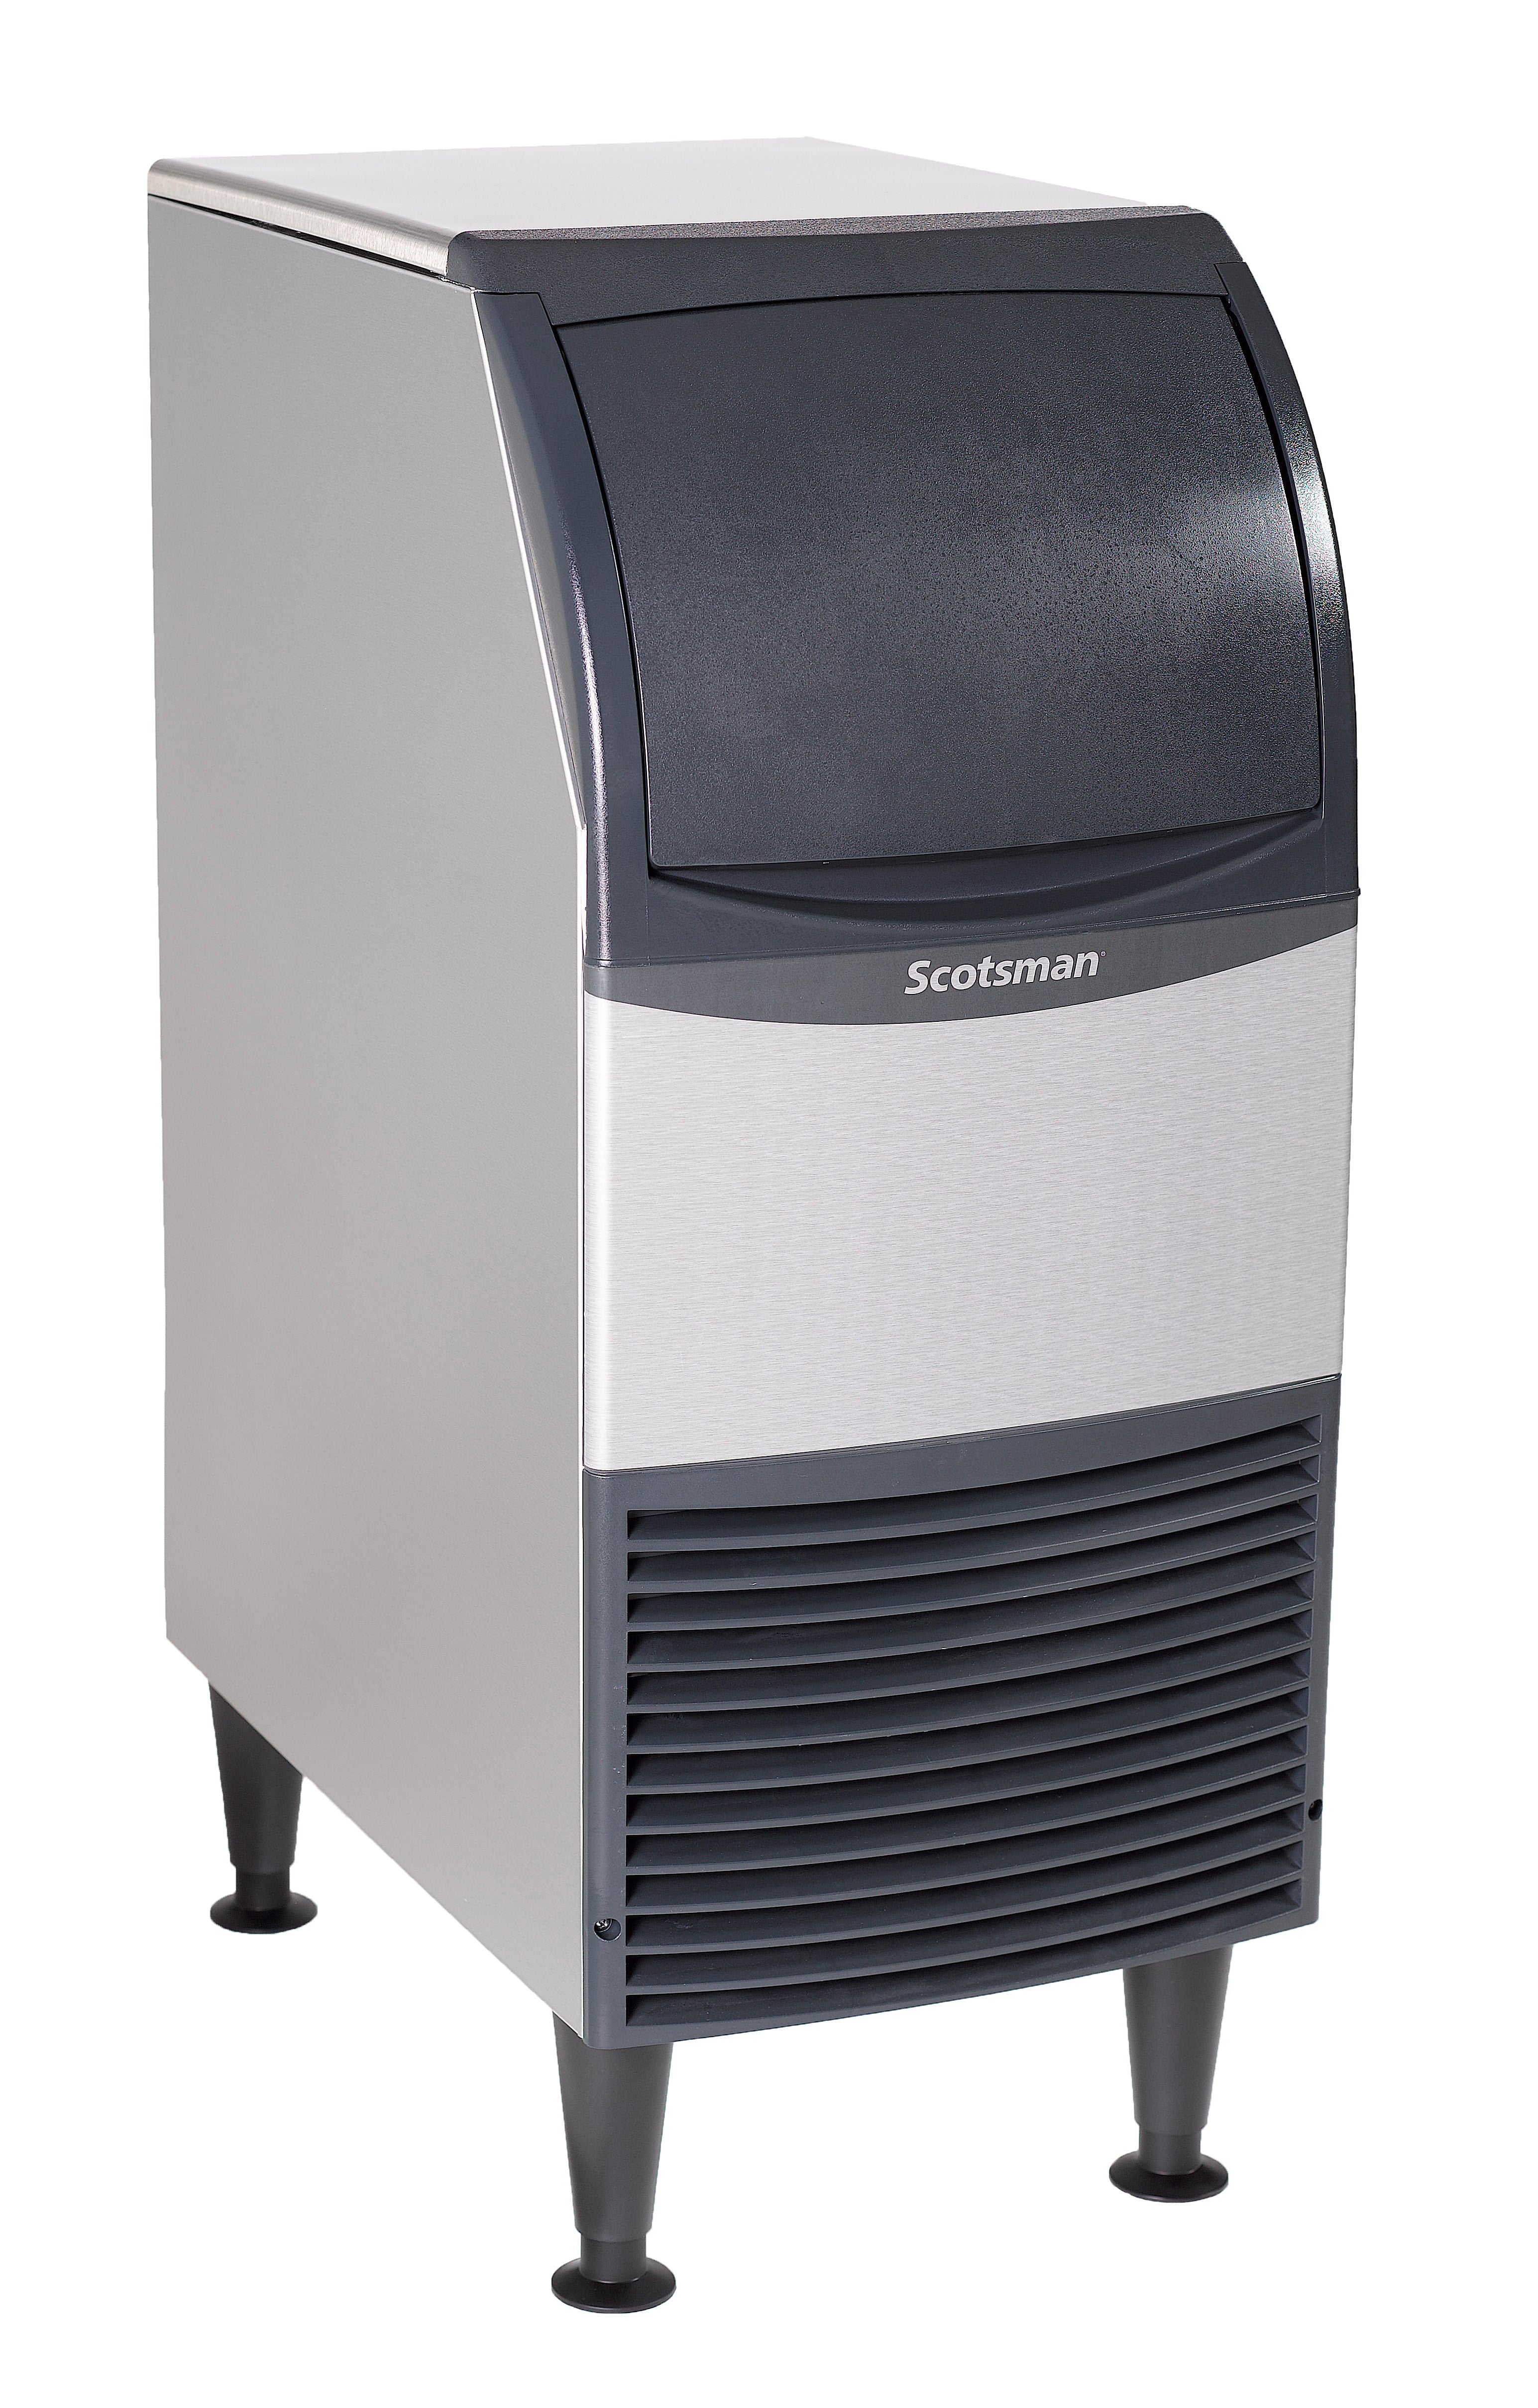 Scotsman UF1415A-1 Air Cooled Flake Ice Maker with Bin Produces up to 142 Pounds of Ice Per Hour